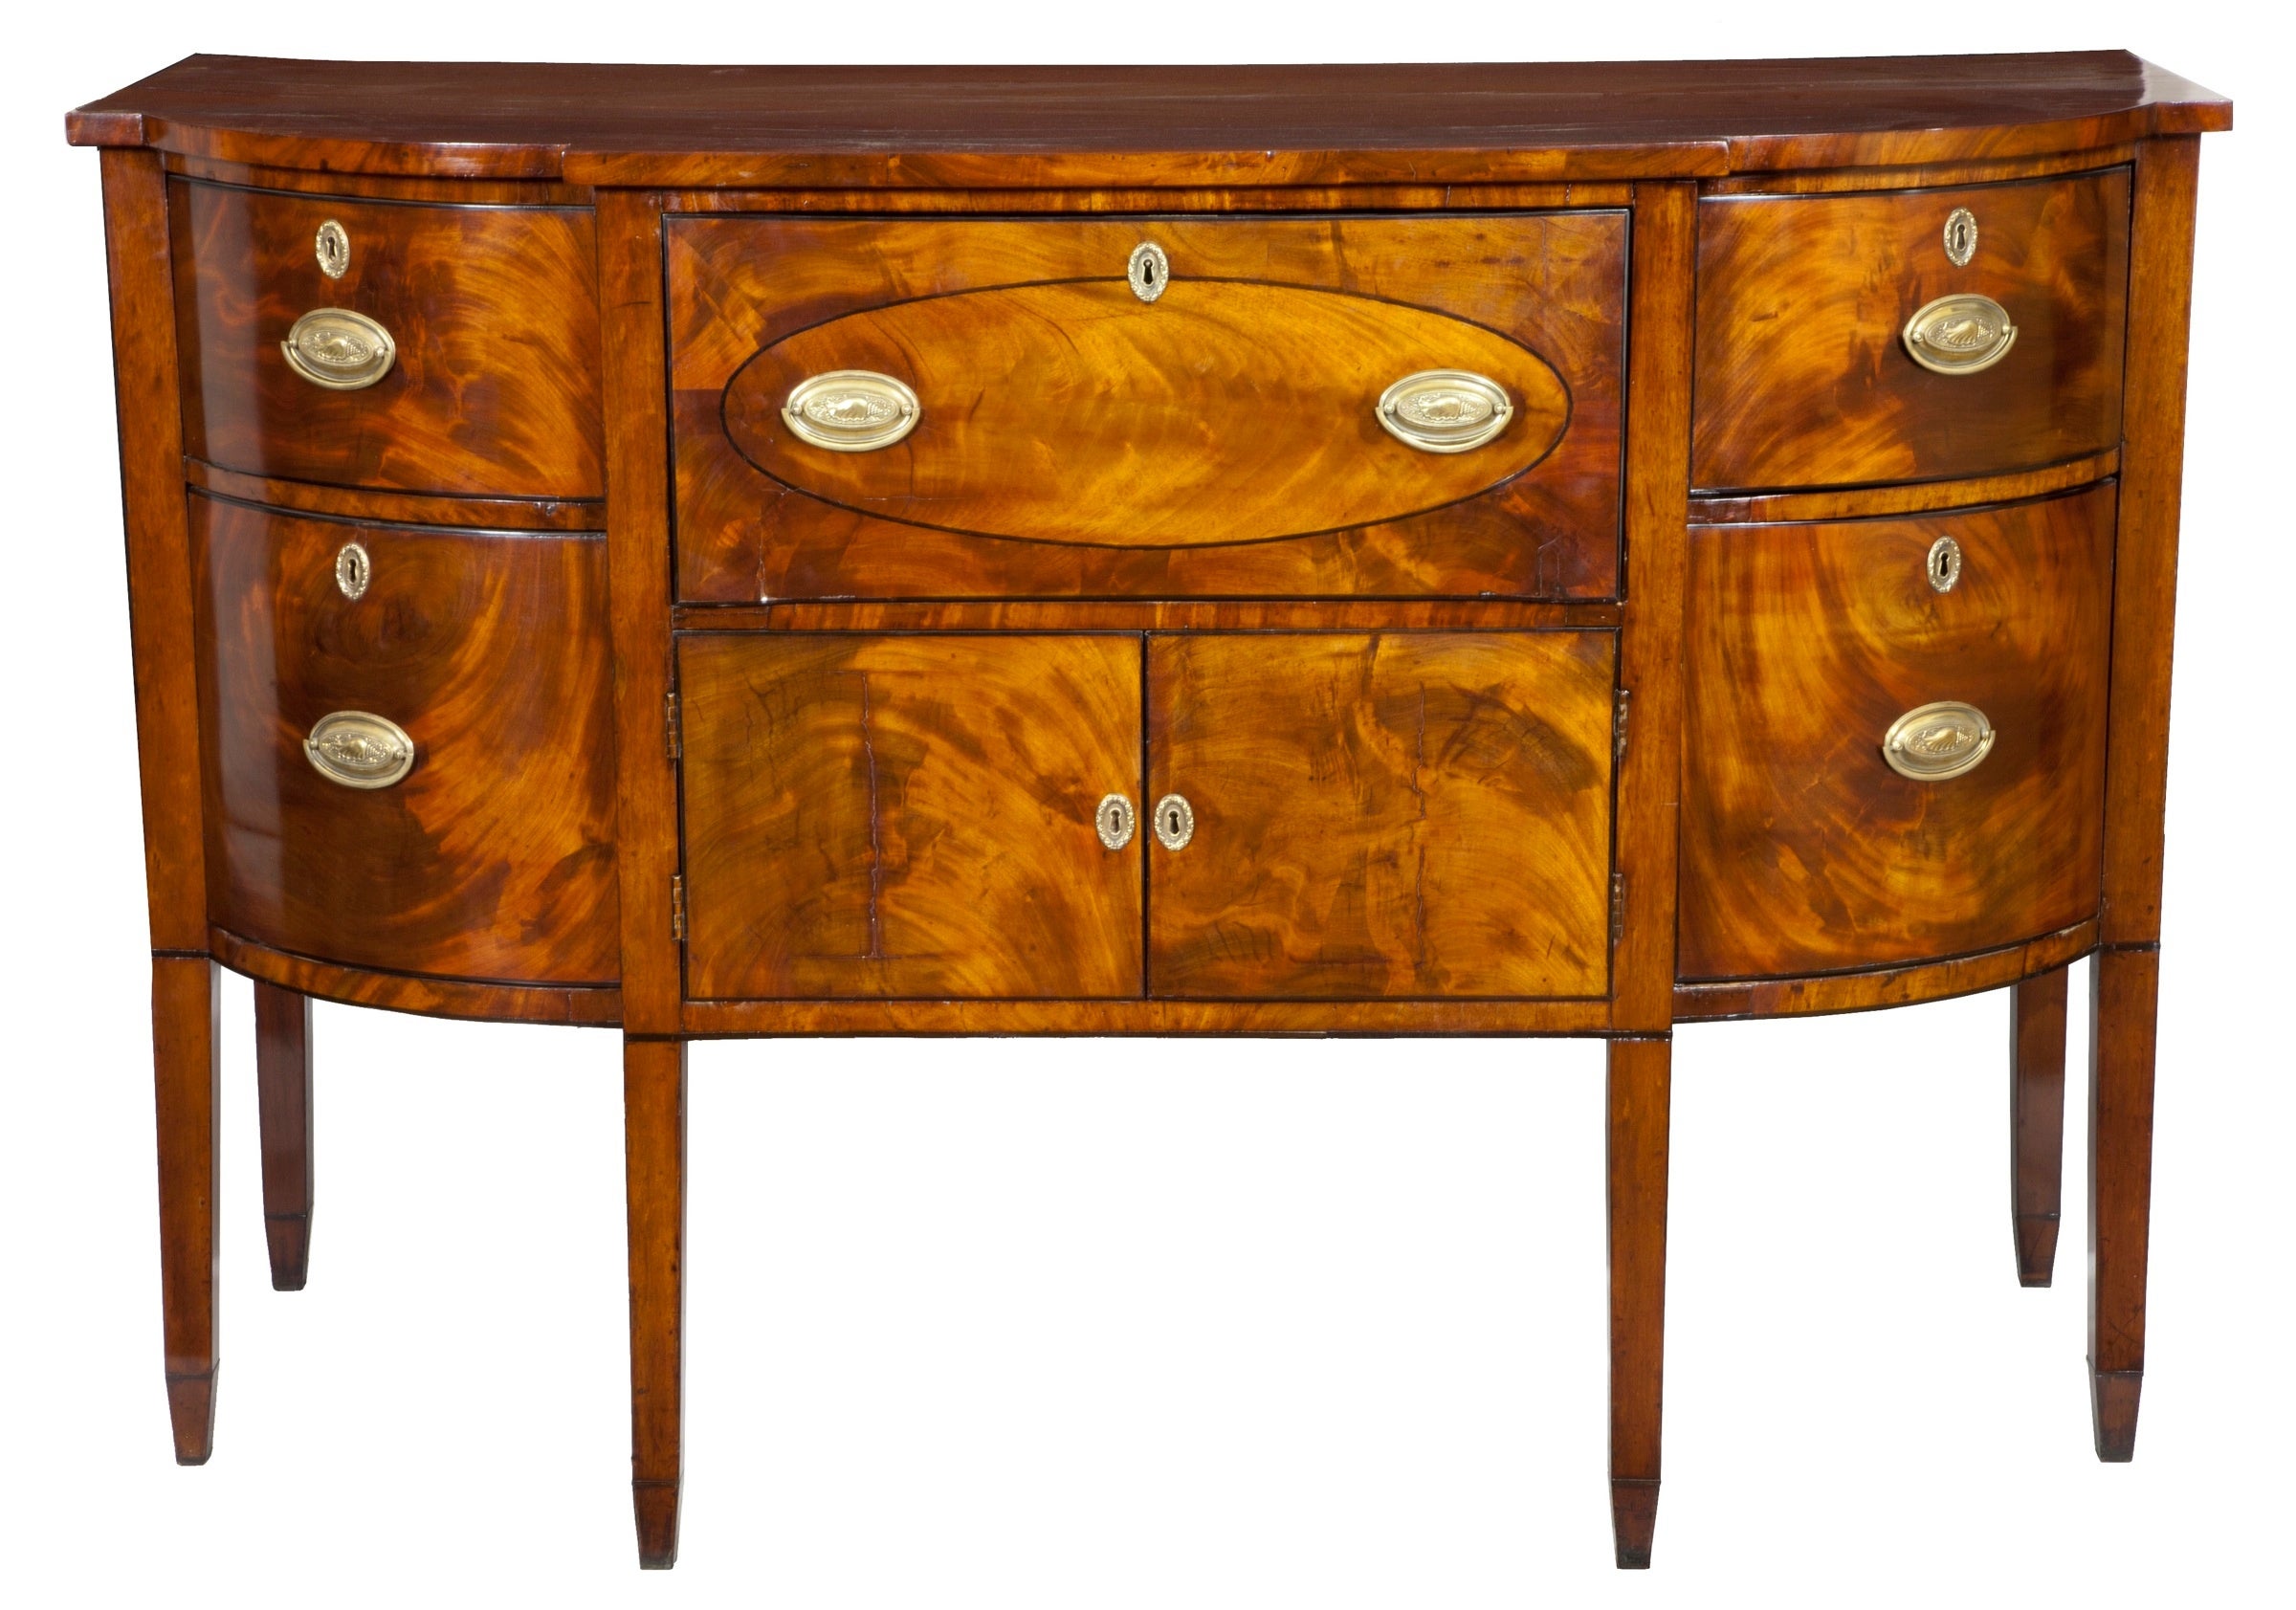 Hepplewhite Mahogany Sideboard with Butler's Desk, circa 1790-1800, RI For Sale